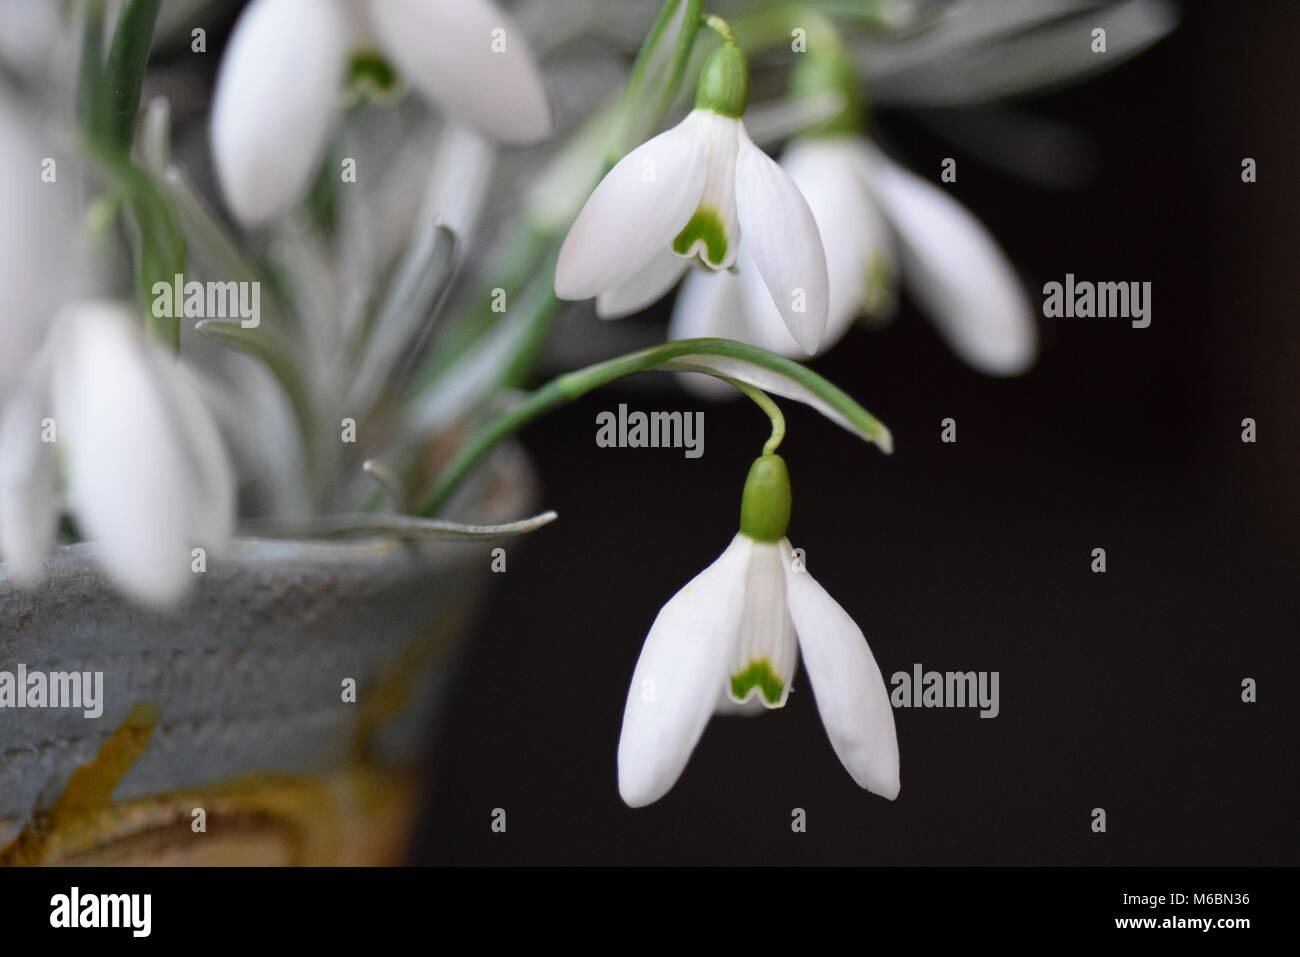 snowdrops and curry plant arrangement Stock Photo